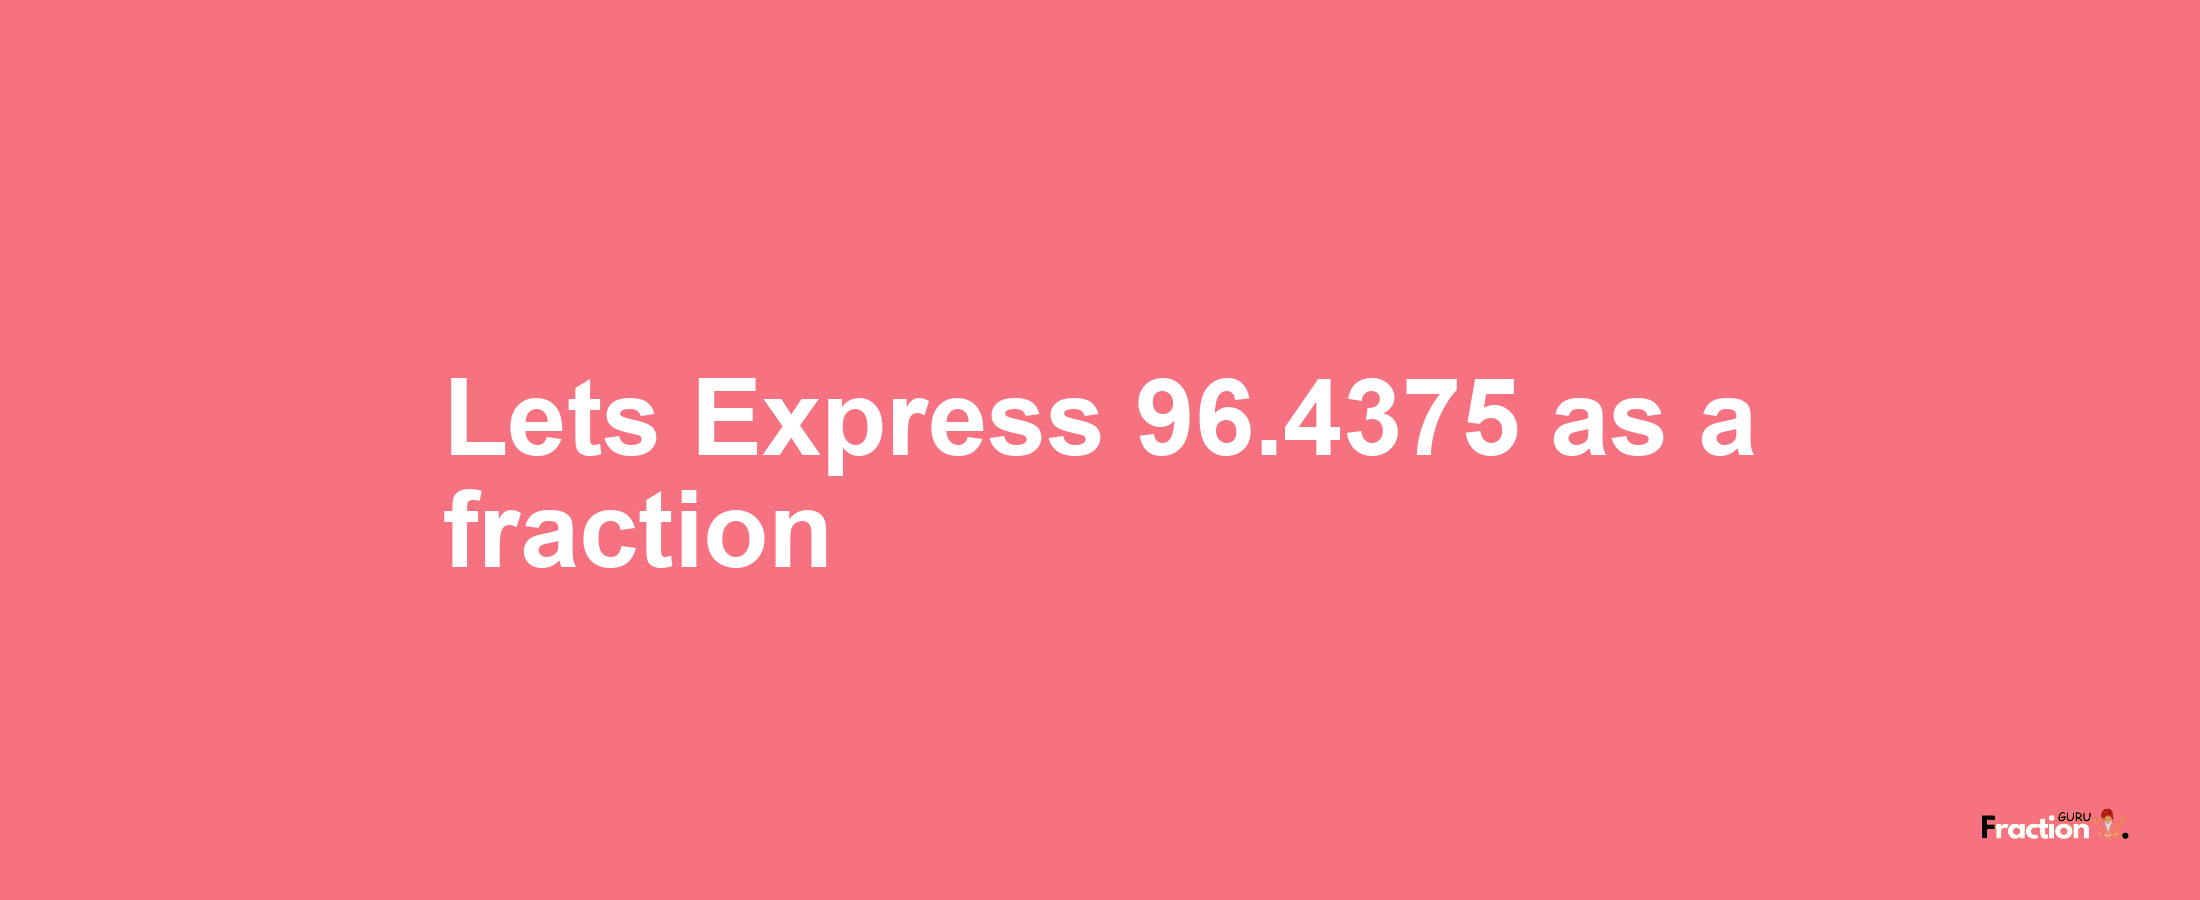 Lets Express 96.4375 as afraction